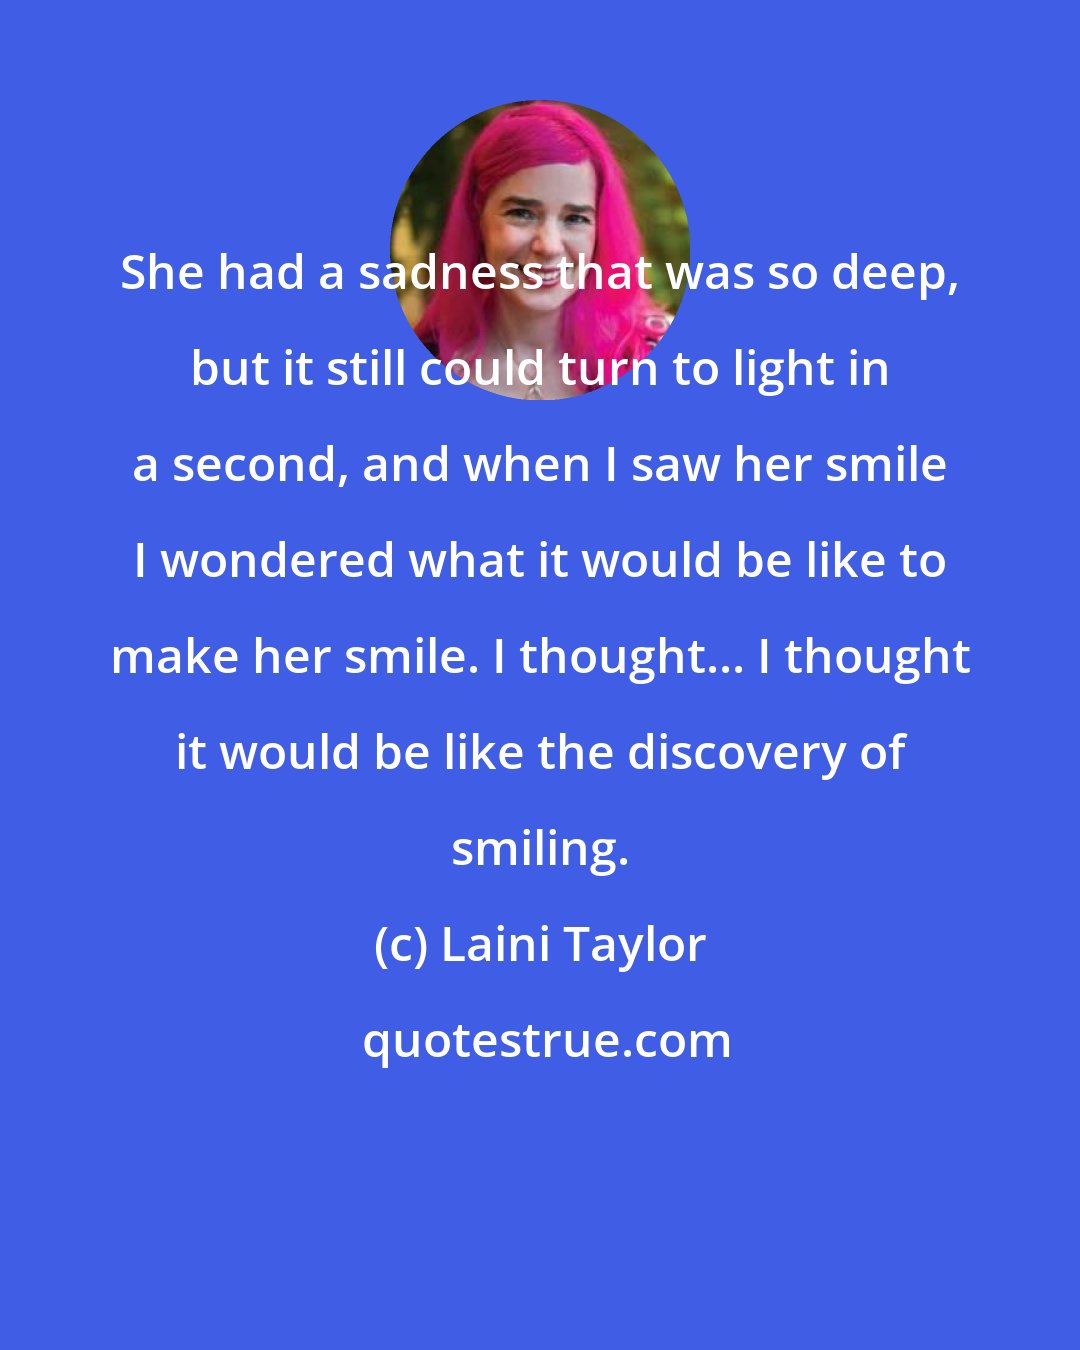 Laini Taylor: She had a sadness that was so deep, but it still could turn to light in a second, and when I saw her smile I wondered what it would be like to make her smile. I thought... I thought it would be like the discovery of smiling.